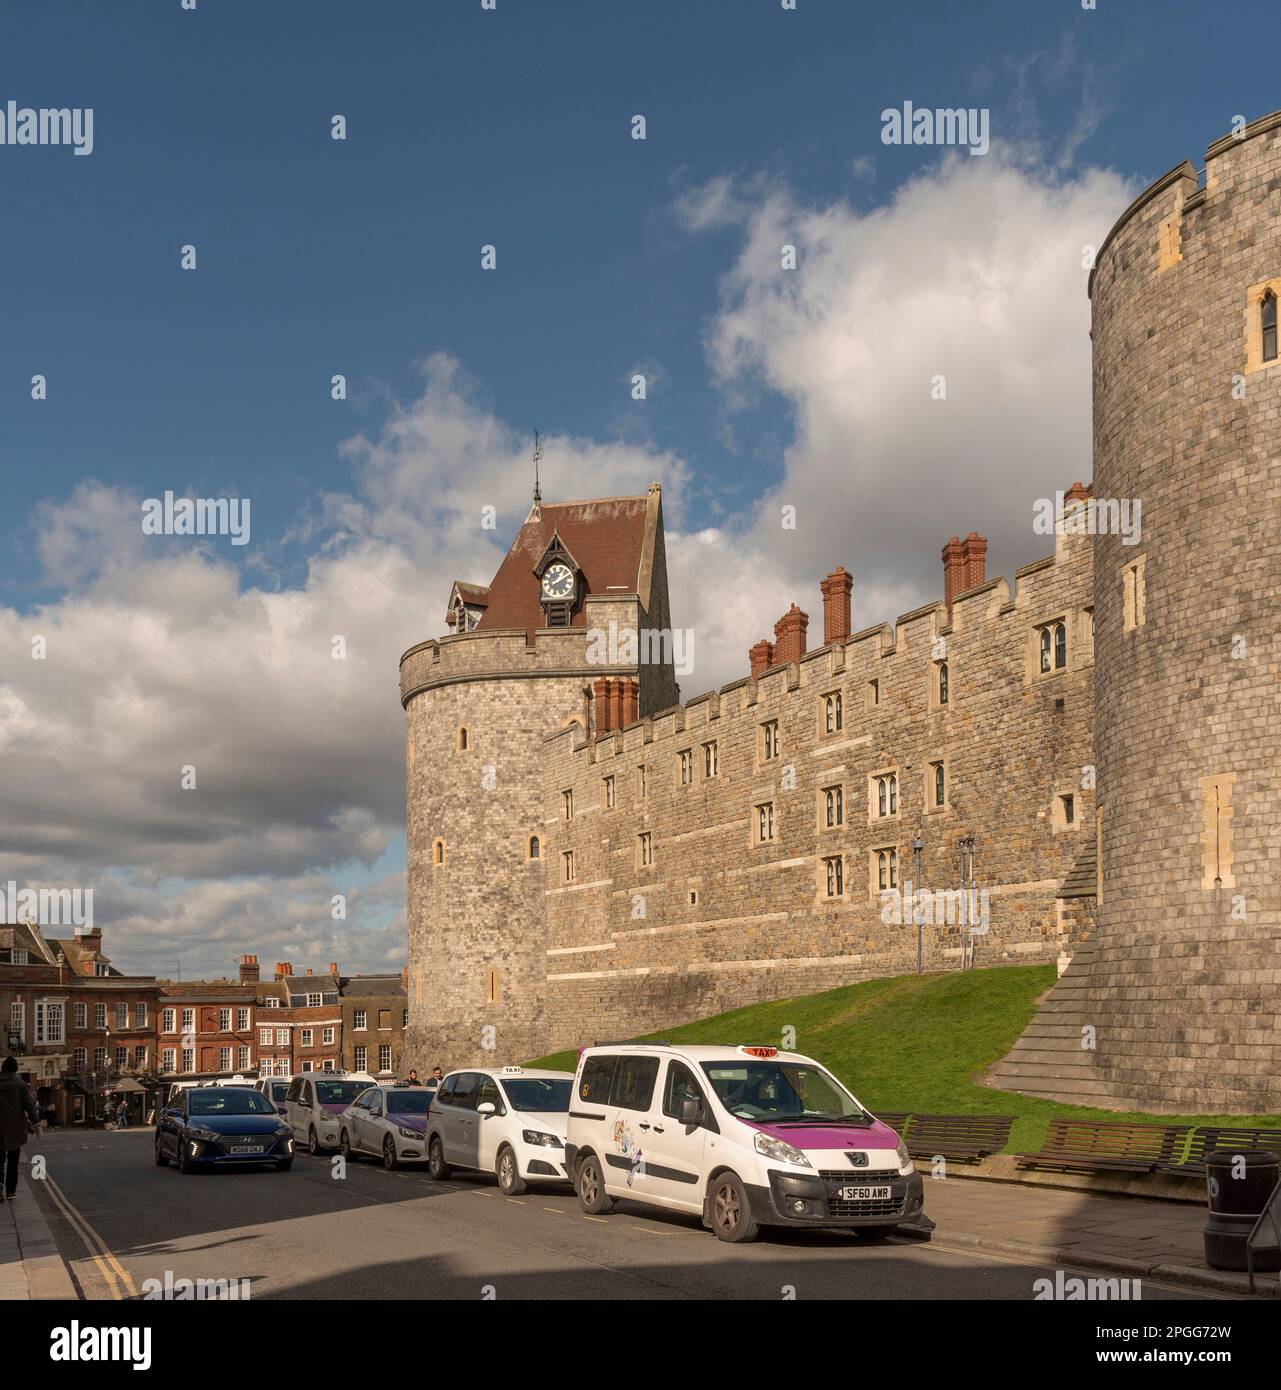 Windsor, Berkshire, England, UK. 2023. Taxi rank situated by the Curfew Tower of Windsor Castle a royal residence. Stock Photo